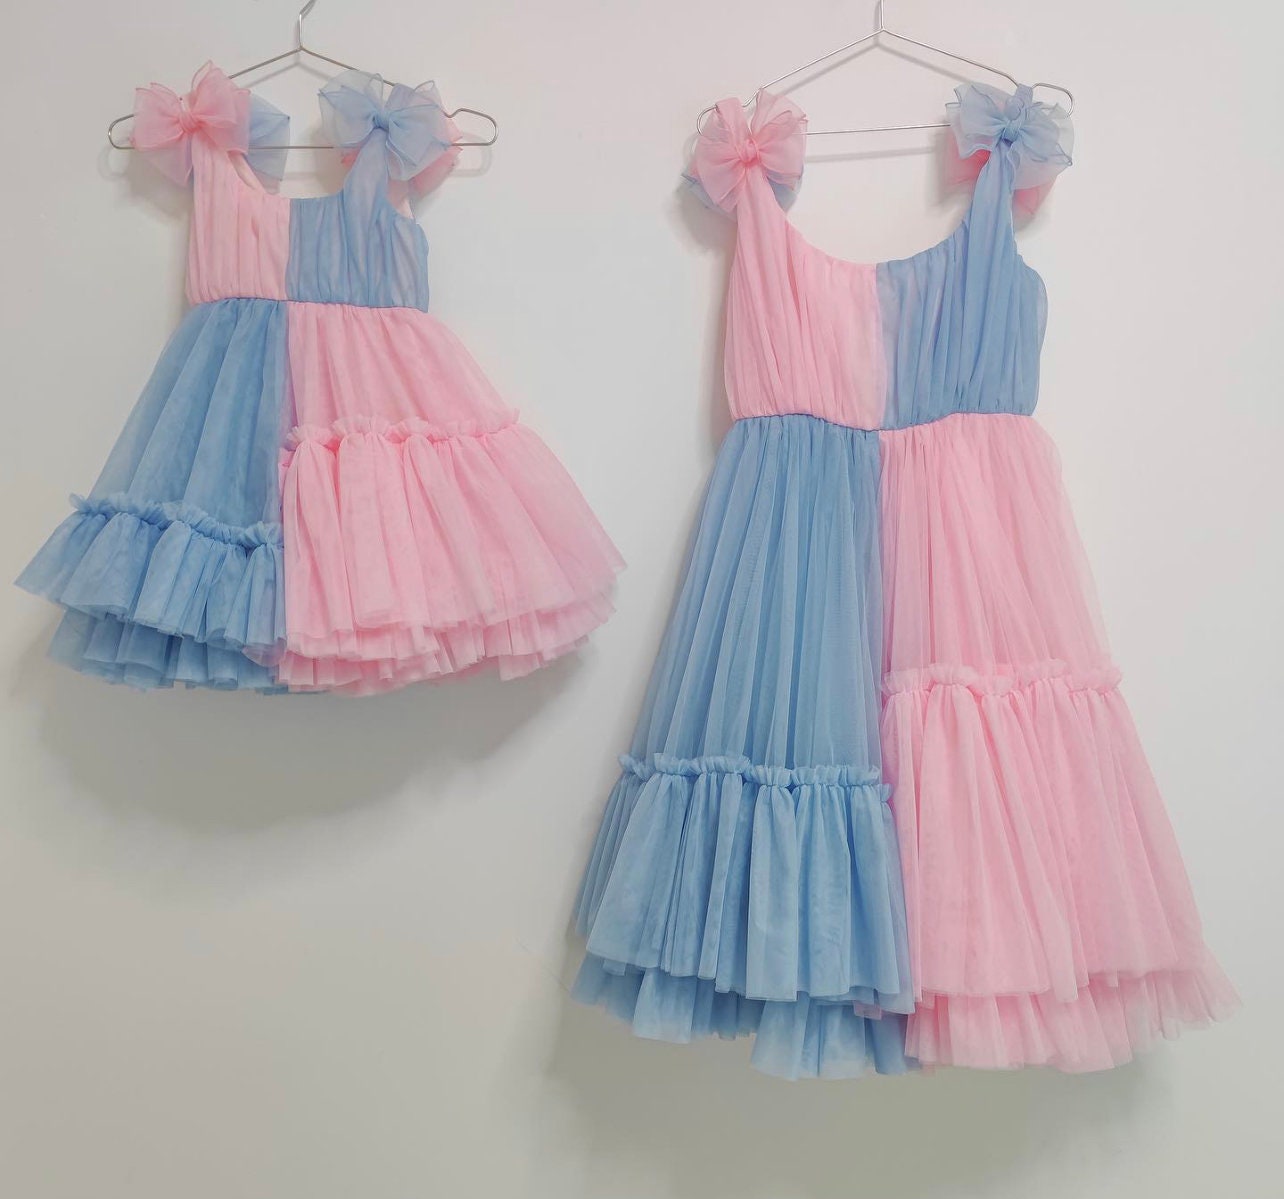 blue dress with pink